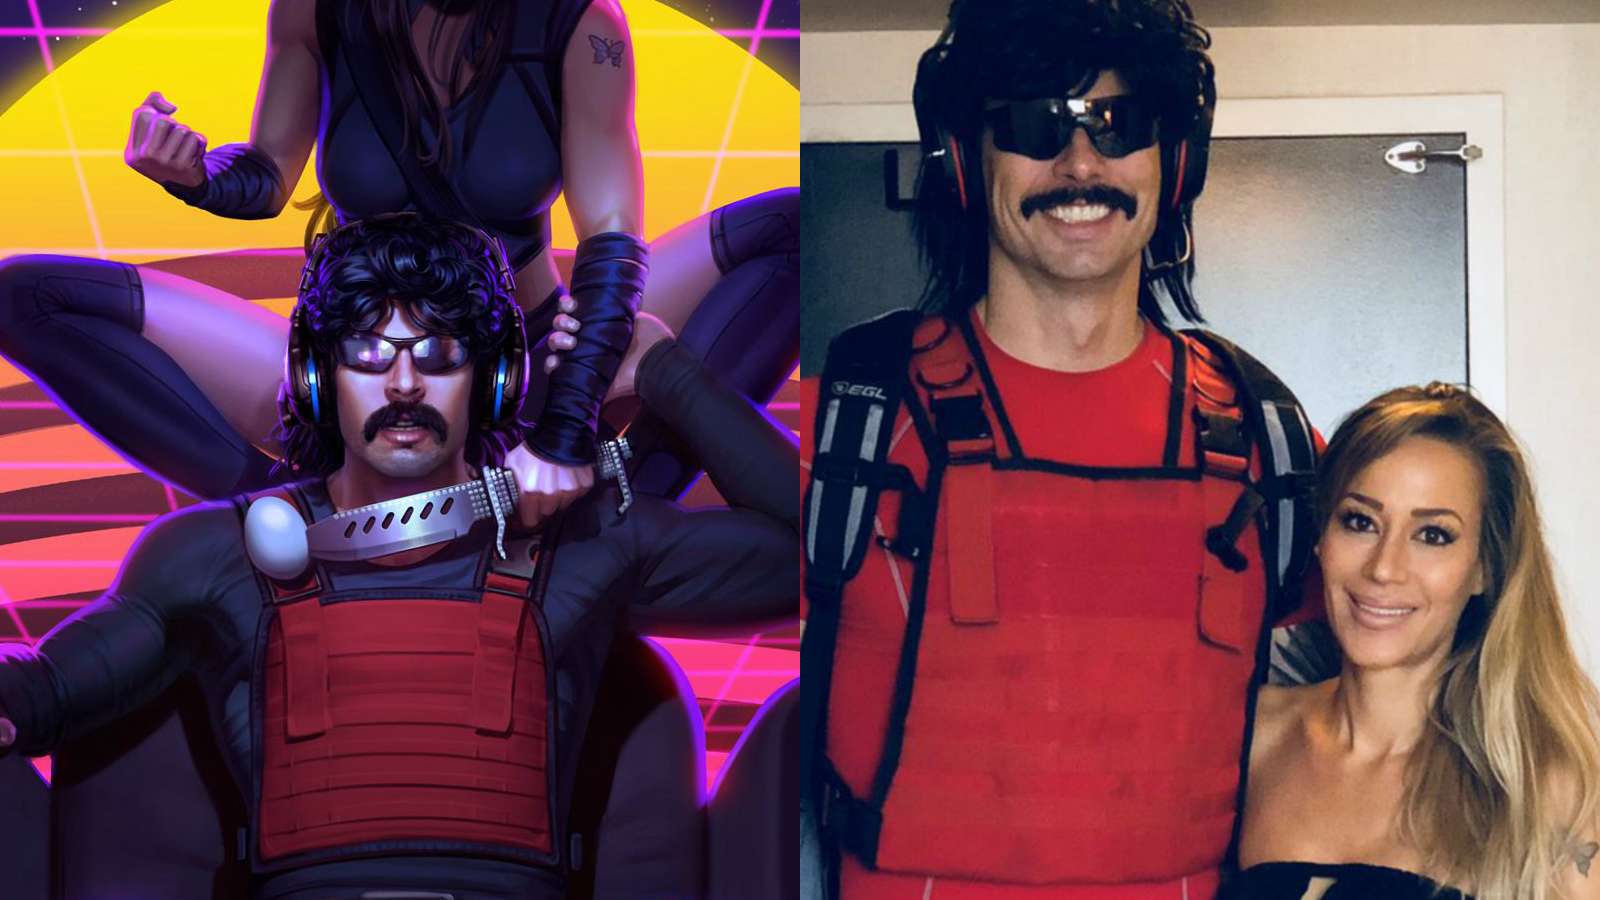 Dr Disrespect and his wife